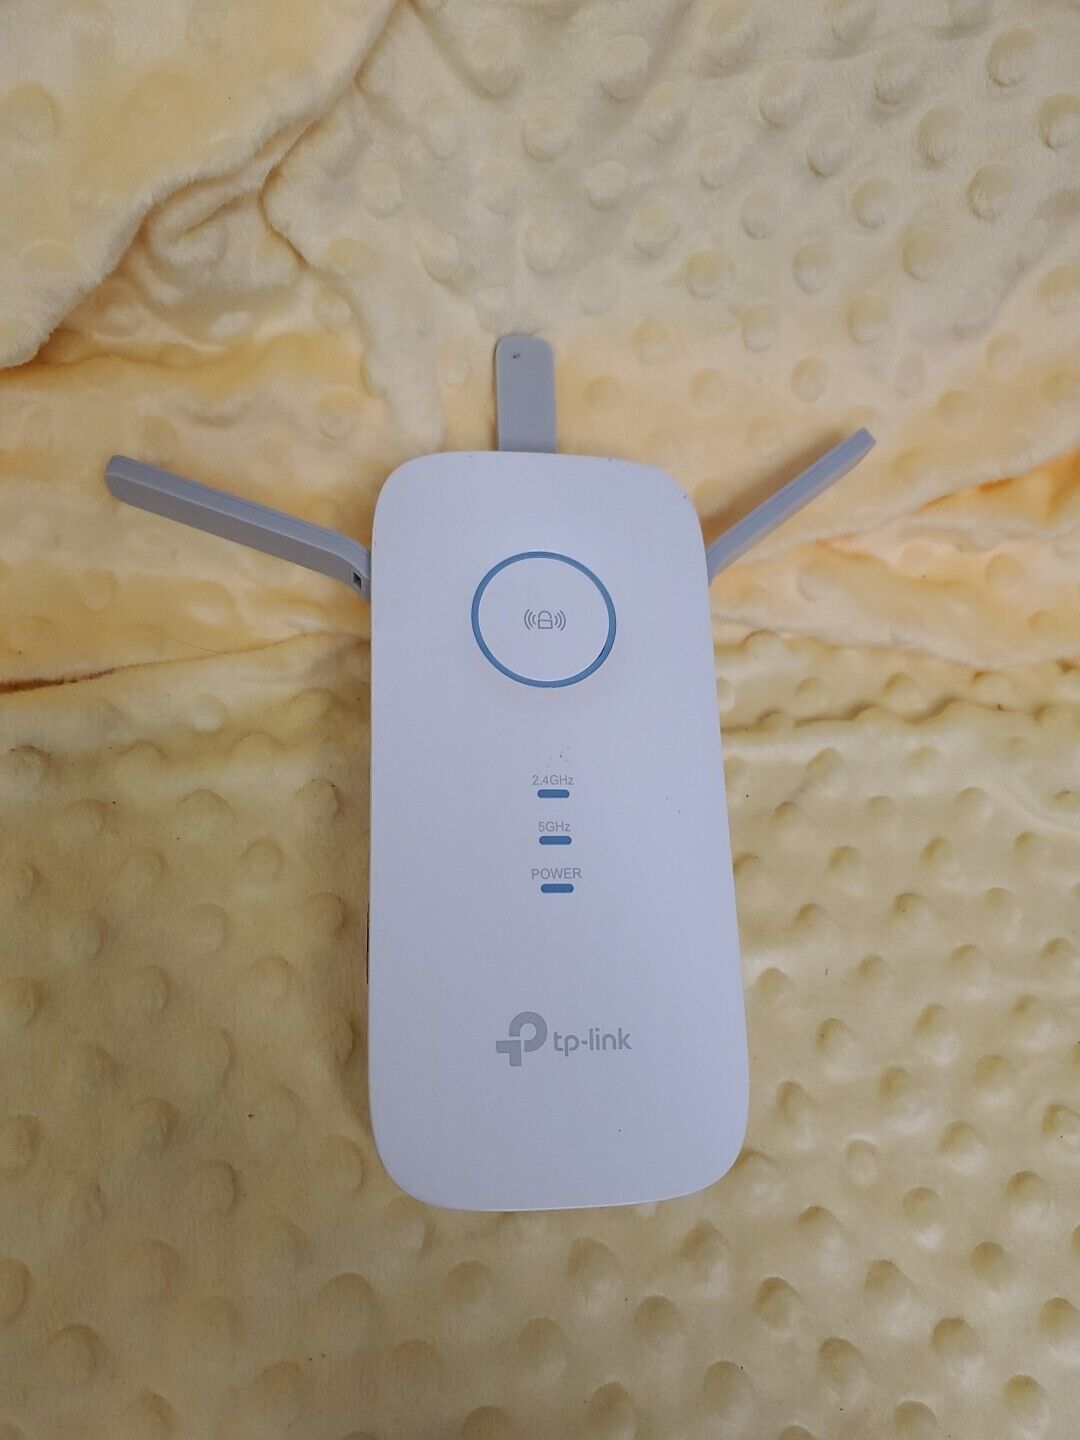 TP-LINK AC1750 Wi-Fi Dual Band Range Extender - RE450 - TESTED 